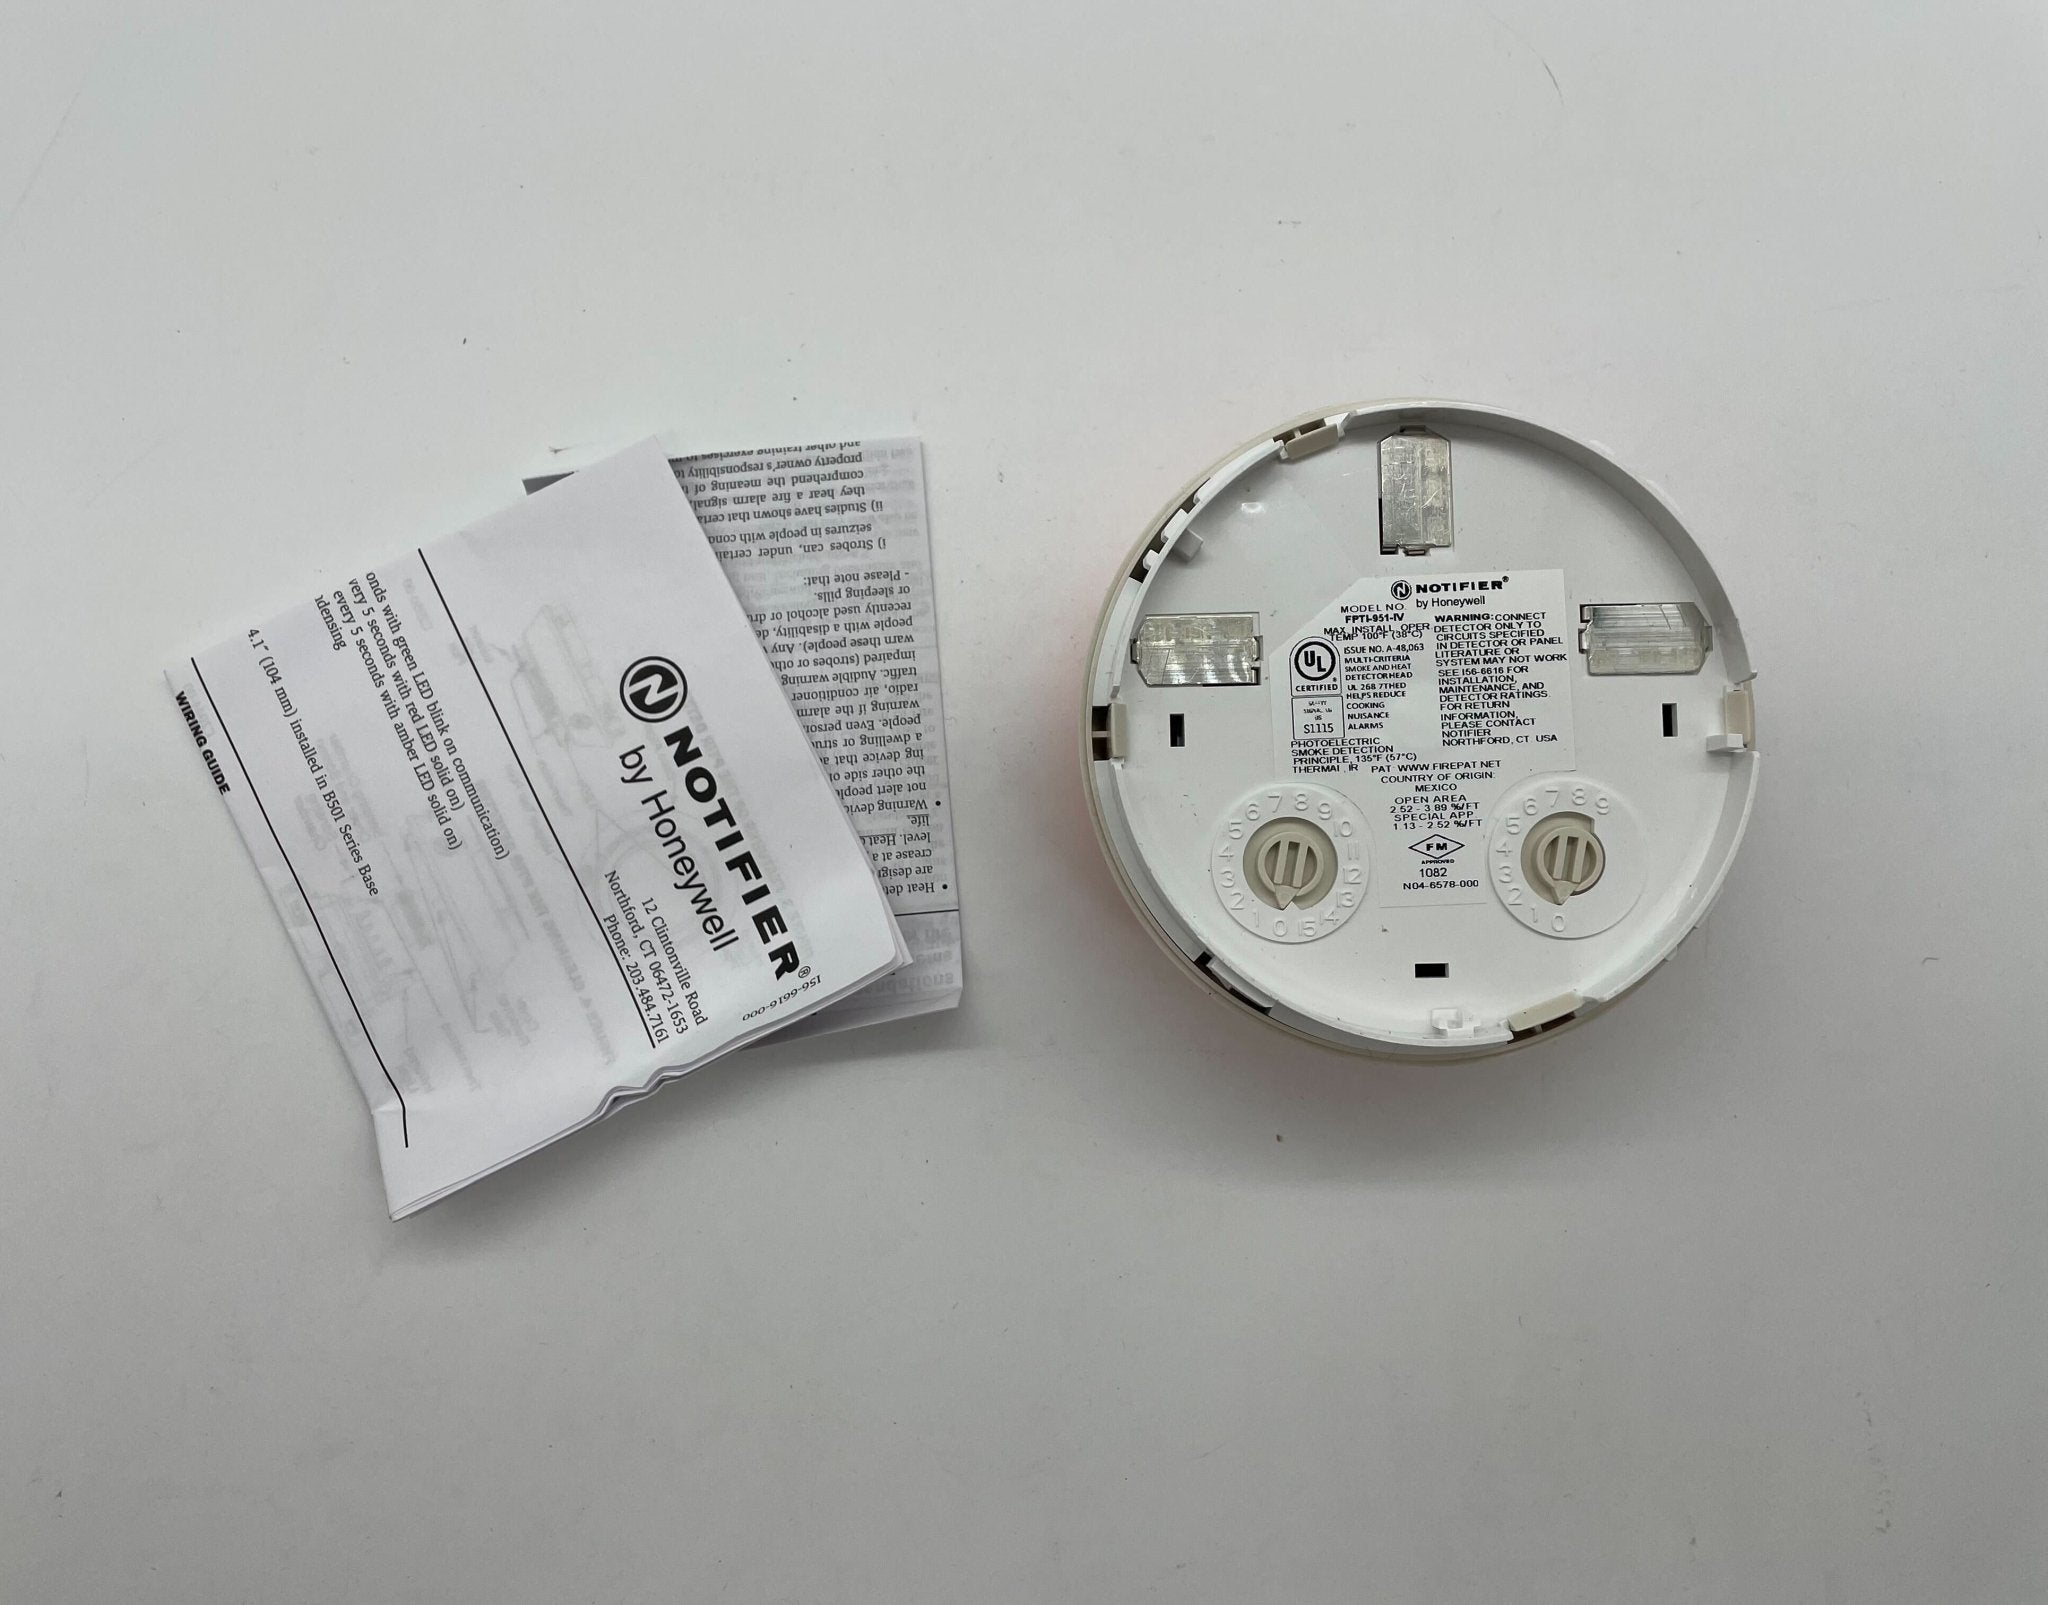 Notifier FPTI-951-IV - The Fire Alarm Supplier